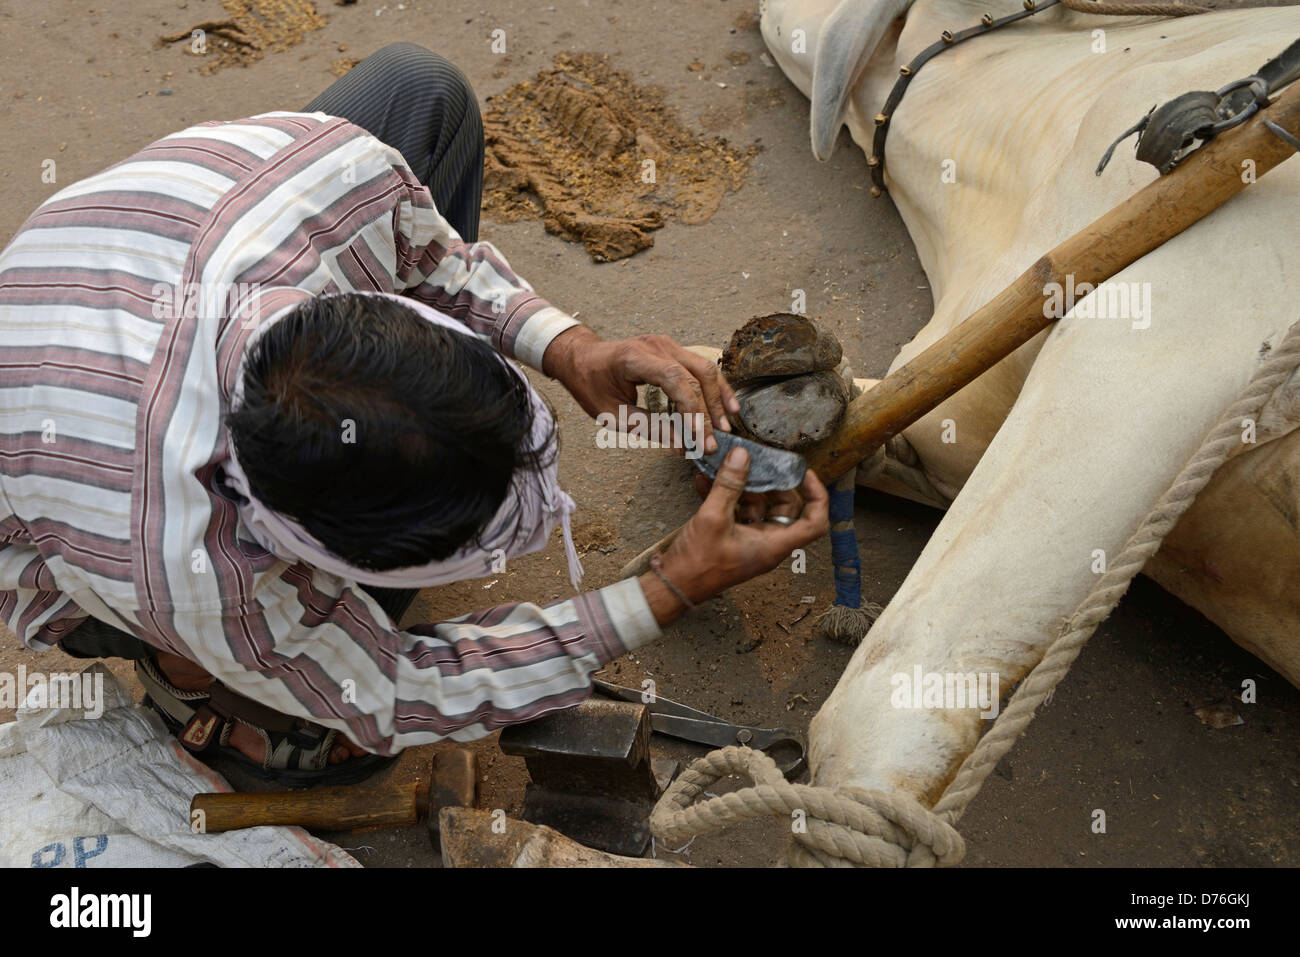 A blacksmith putting a new set of shoes on the cow's hoofs in a street of Old Delhi, India. Stock Photo